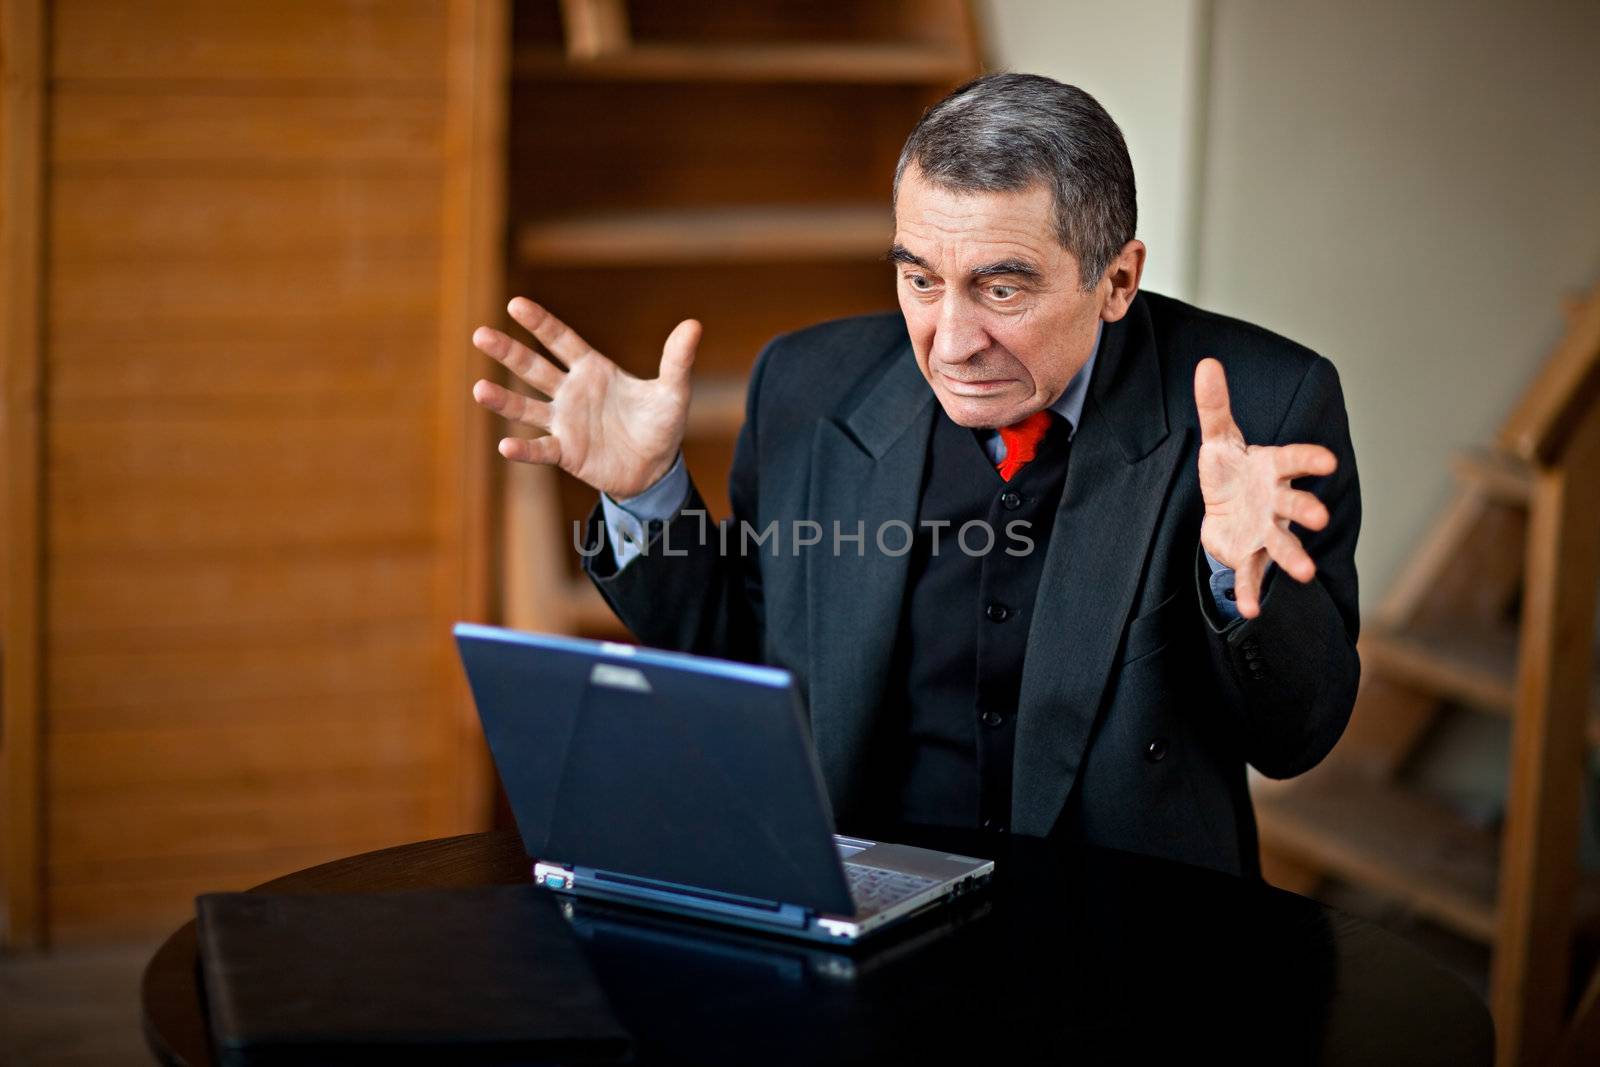 Shocked businessman working on a laptop